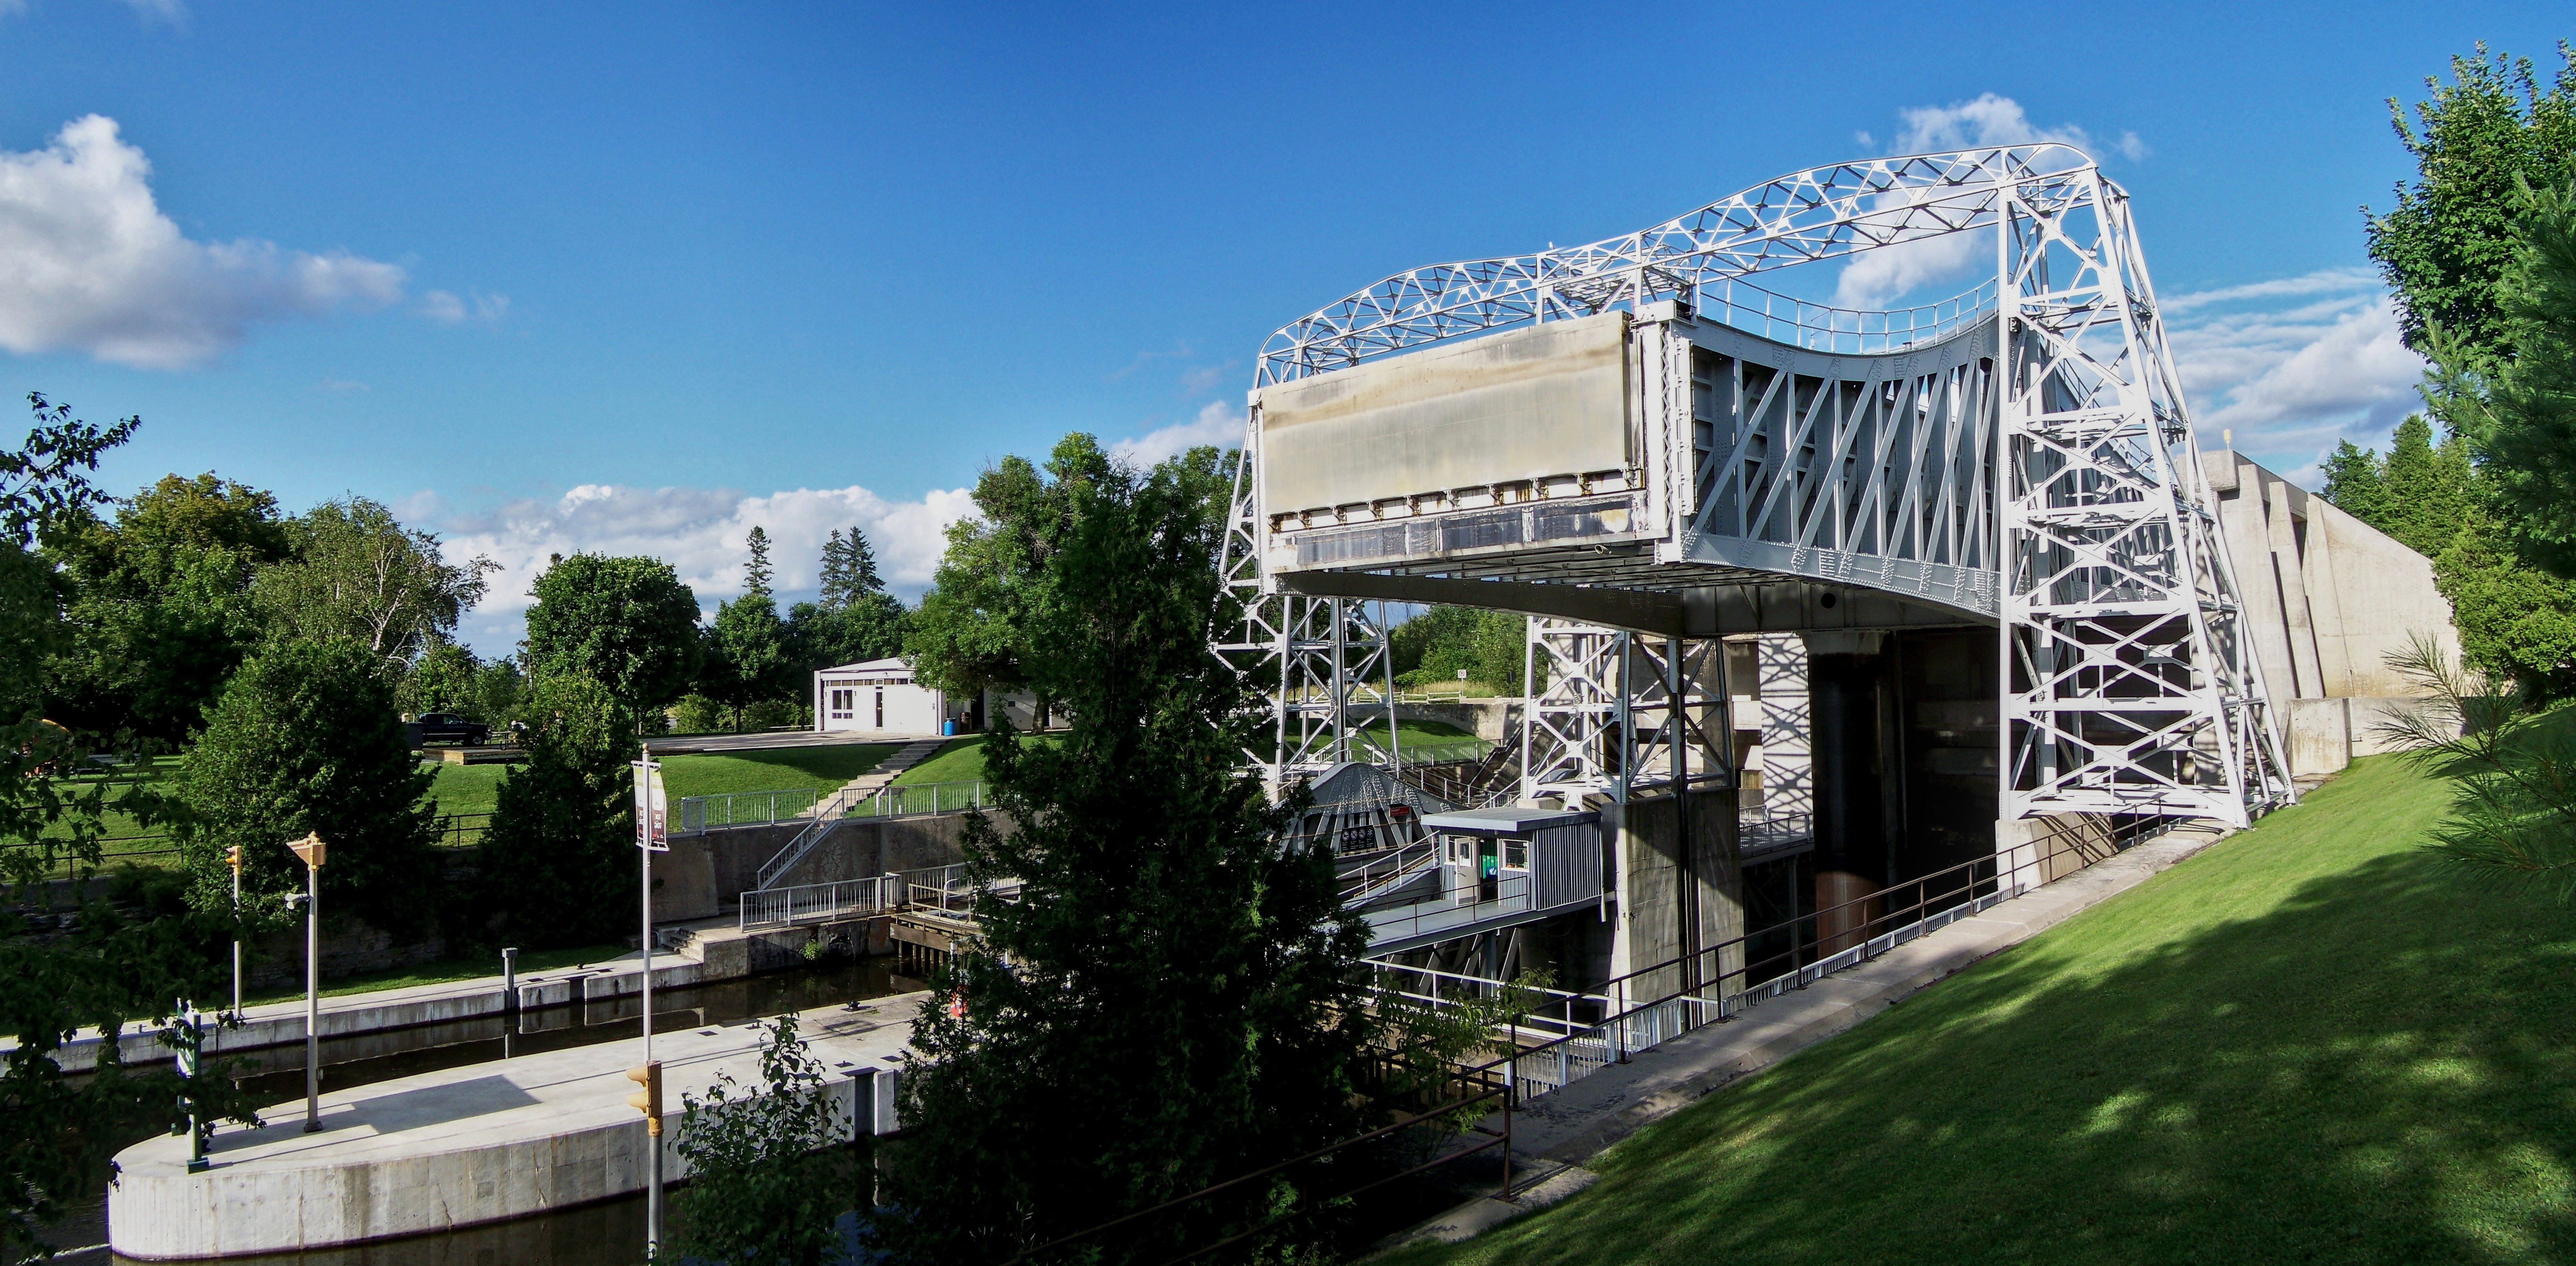 Exterior view of large, white-painted steel structure straddling a canal with one boat lift chamber in up position. 